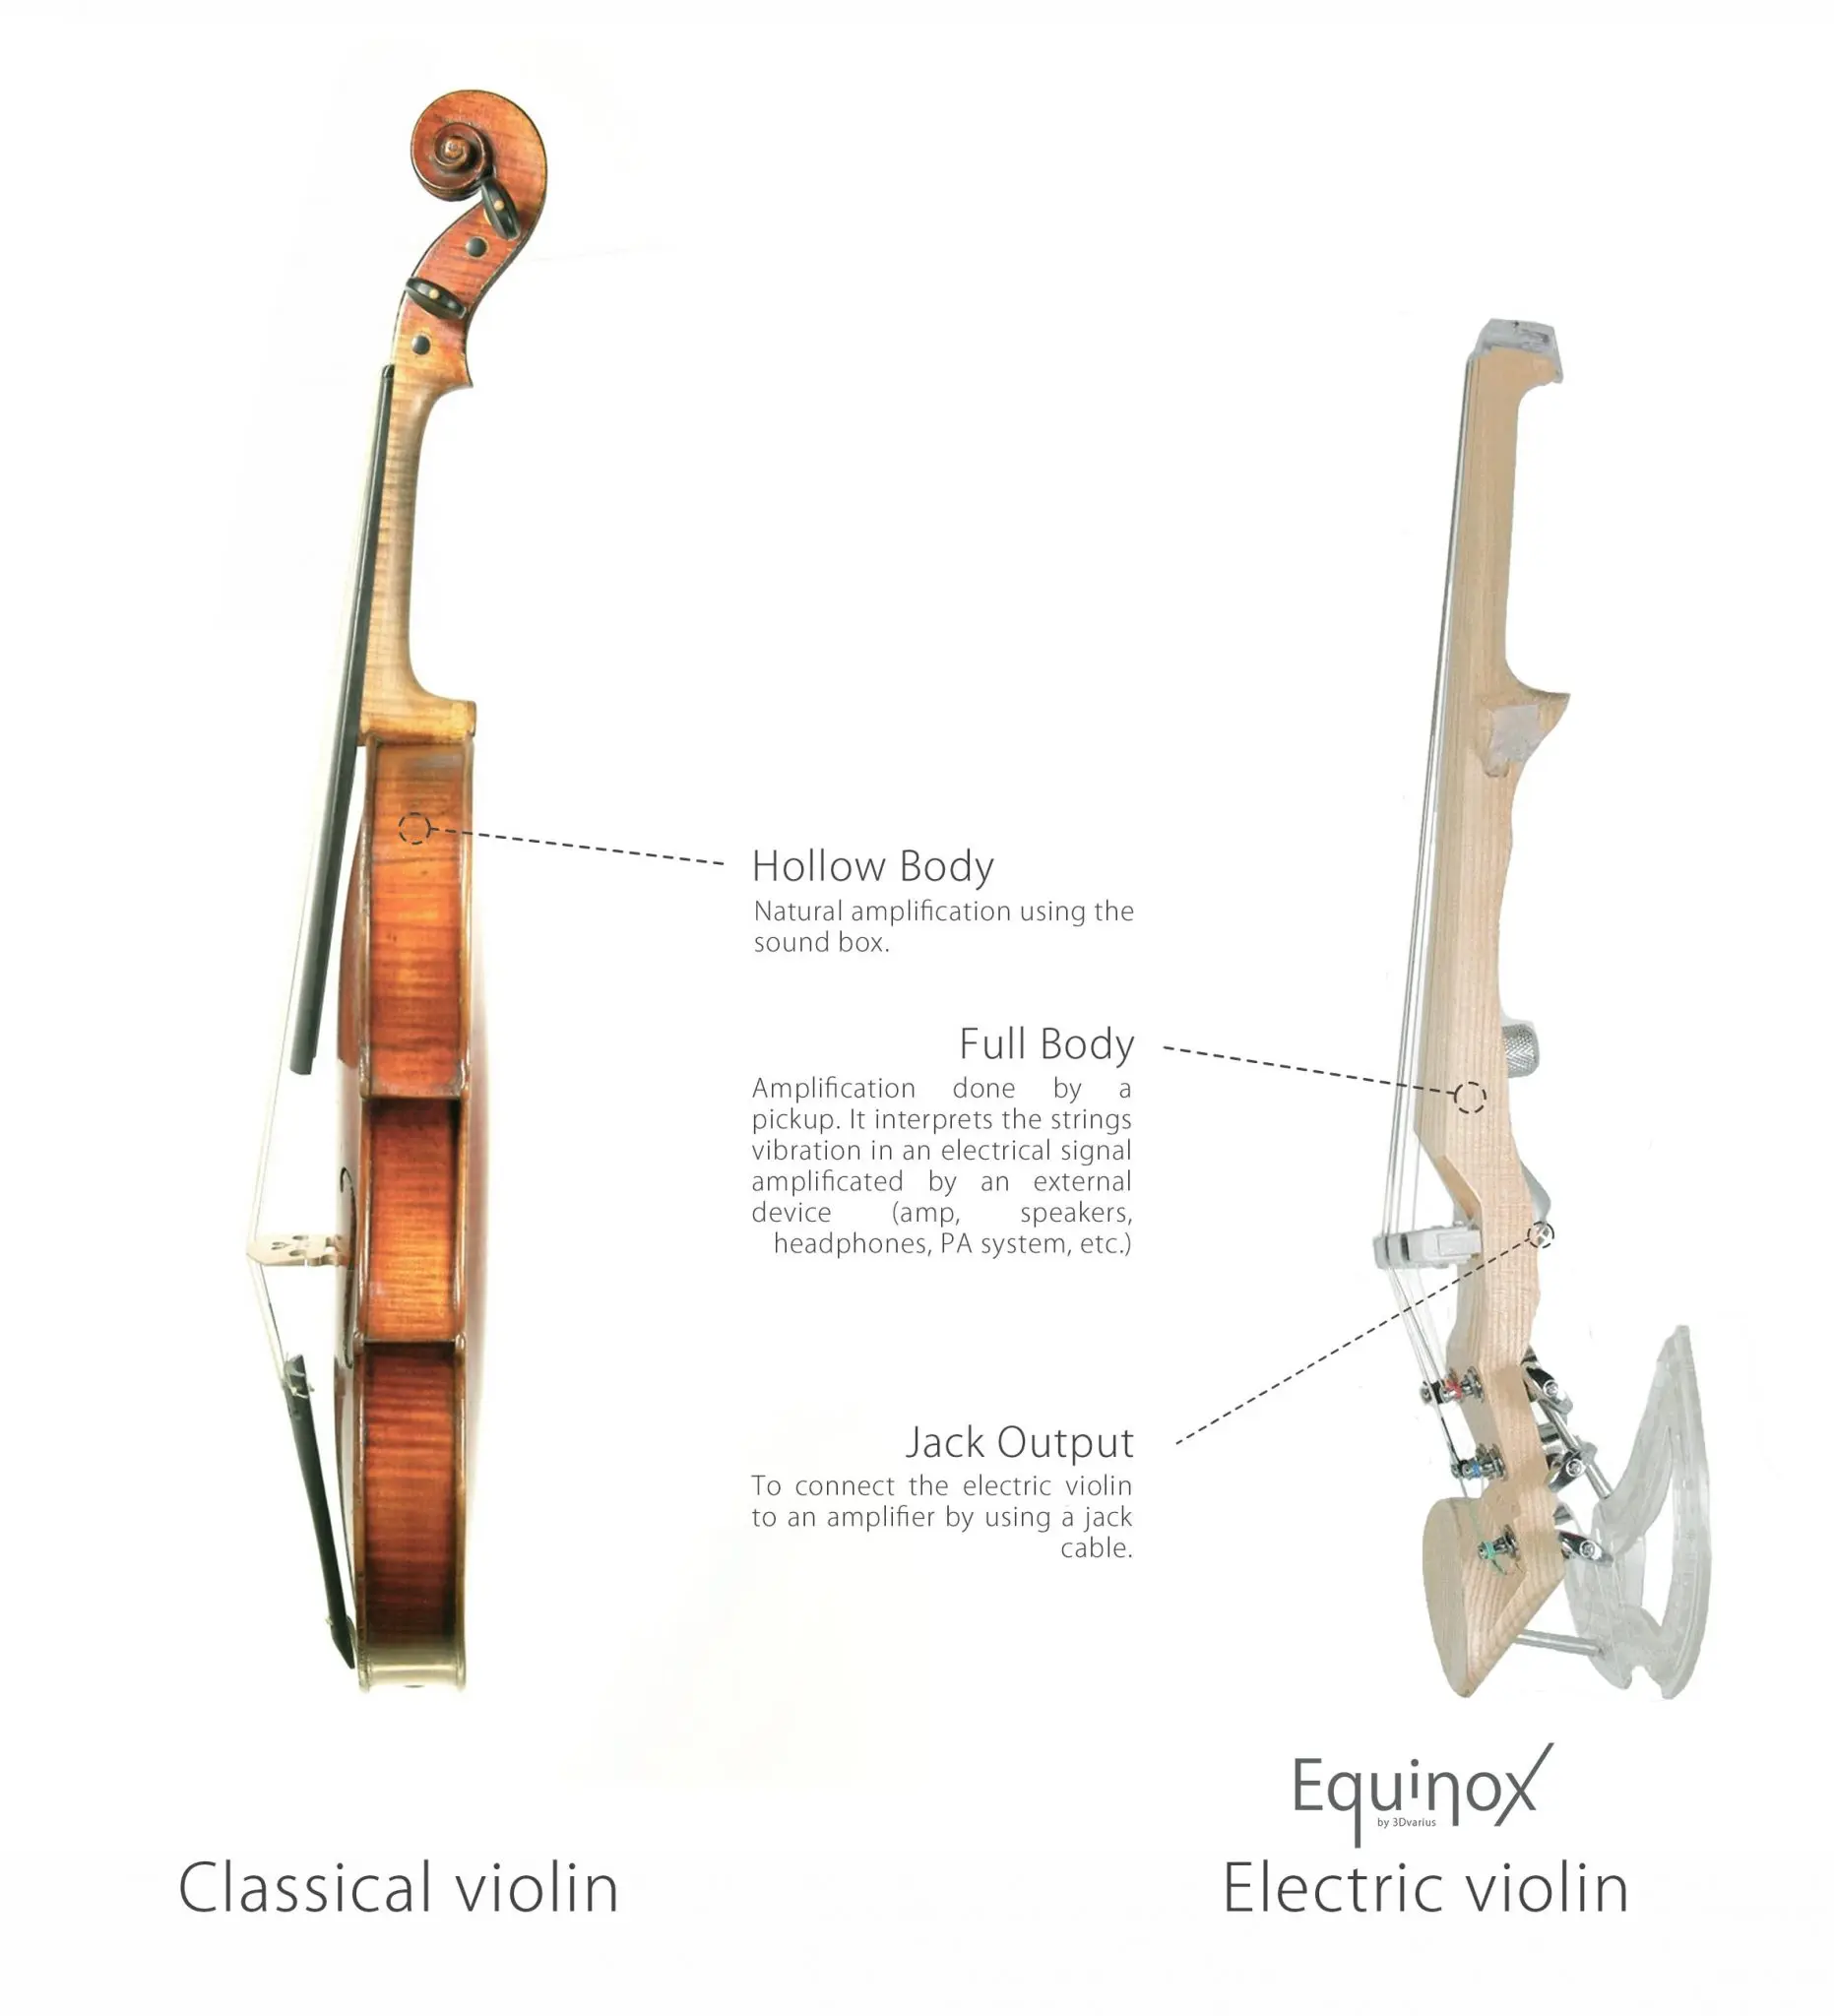 do normal strings work in electric violins - Can you use a regular violin bow on an electric violin